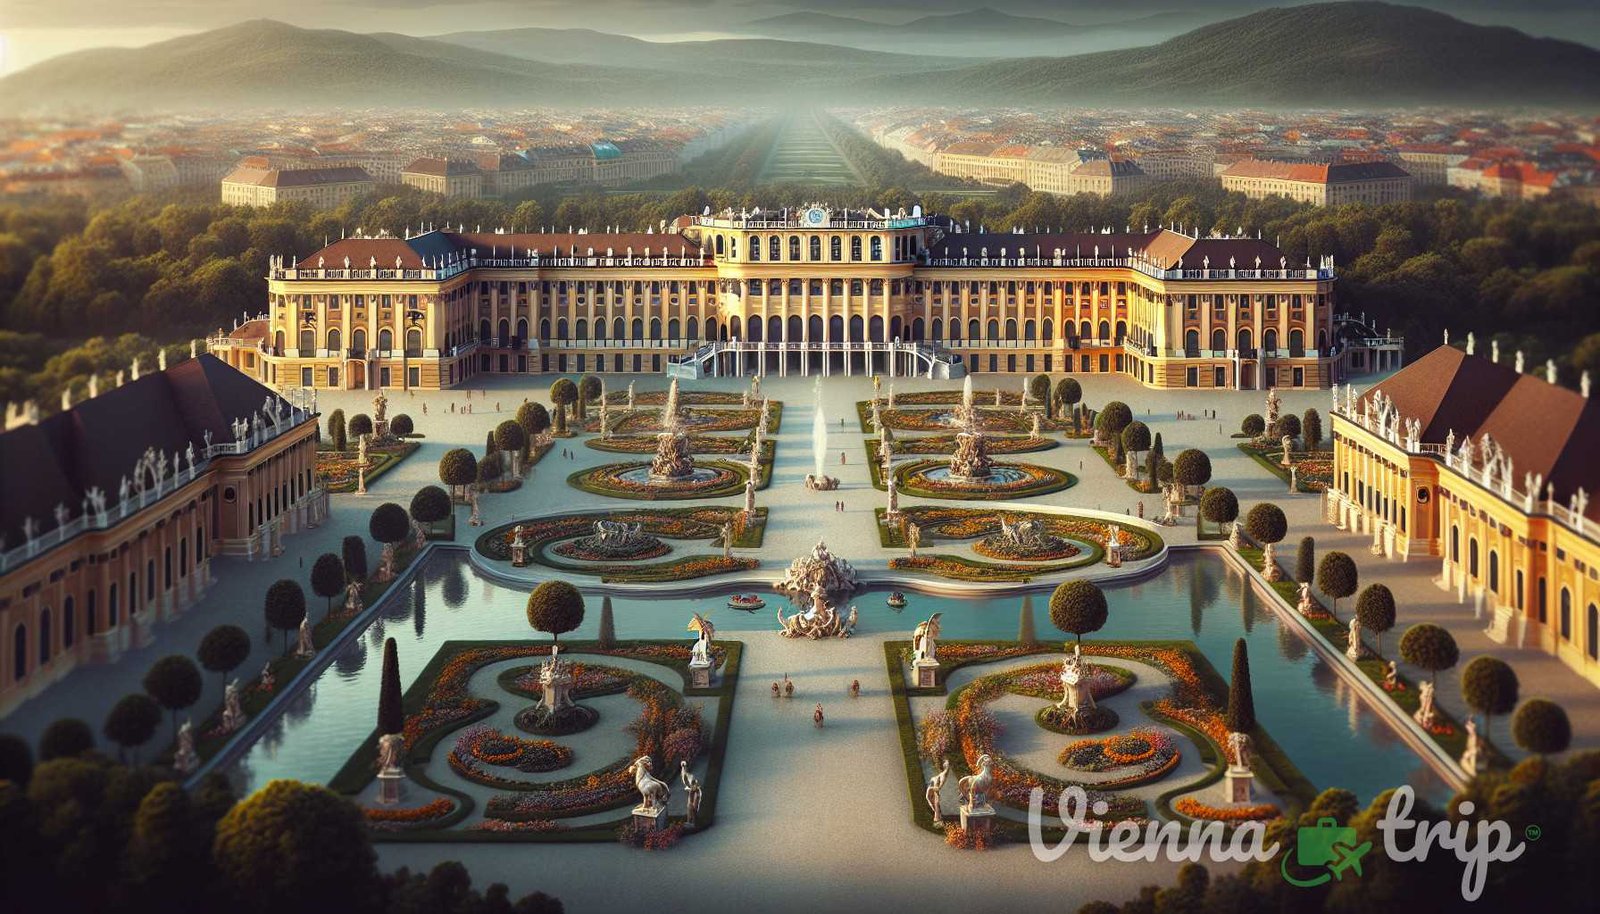 Illustration for section: Schönbrunn Palace: A UNESCO World Heritage Site No exploration of Vienna's palaces would be complet - gilded tales